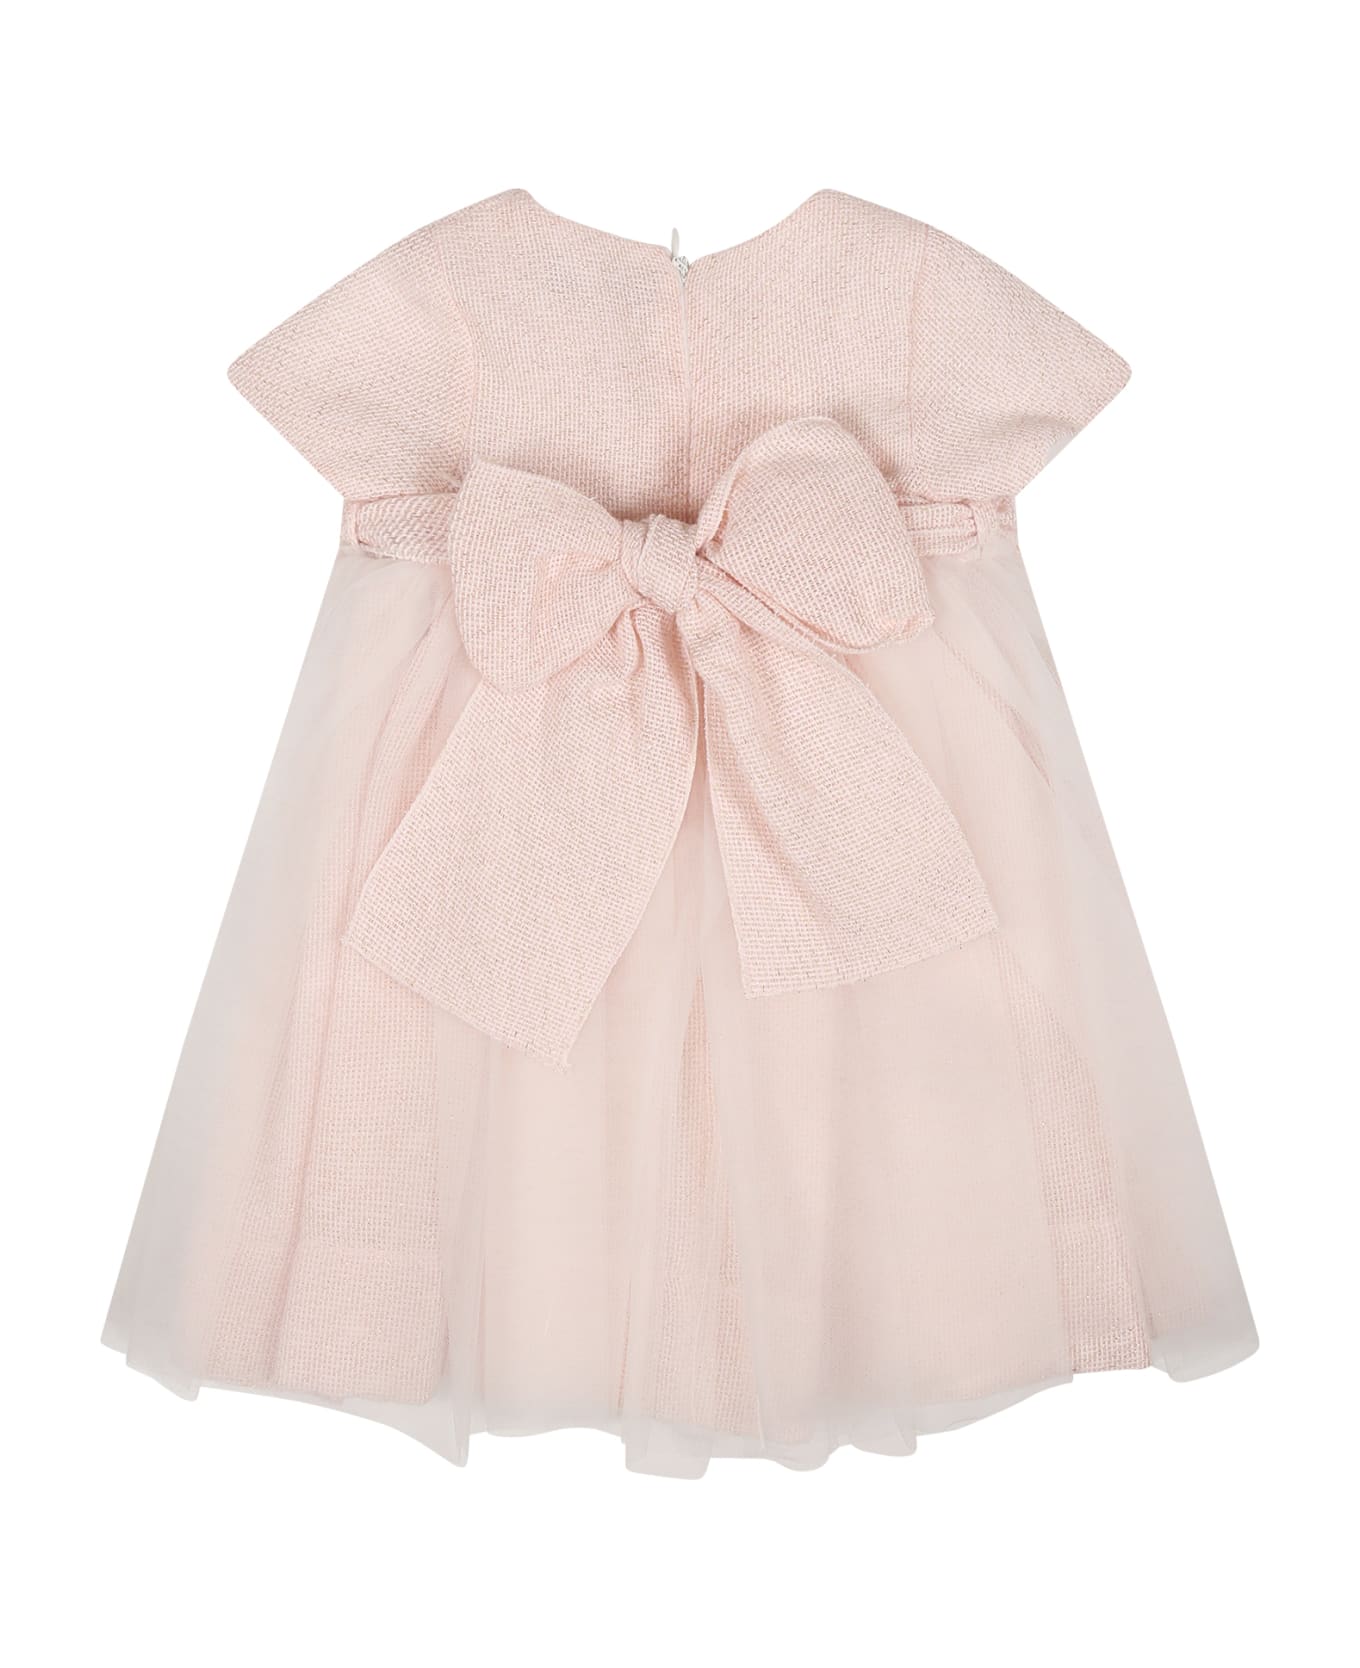 Little Bear Pink Dress For Baby Girl - Pink